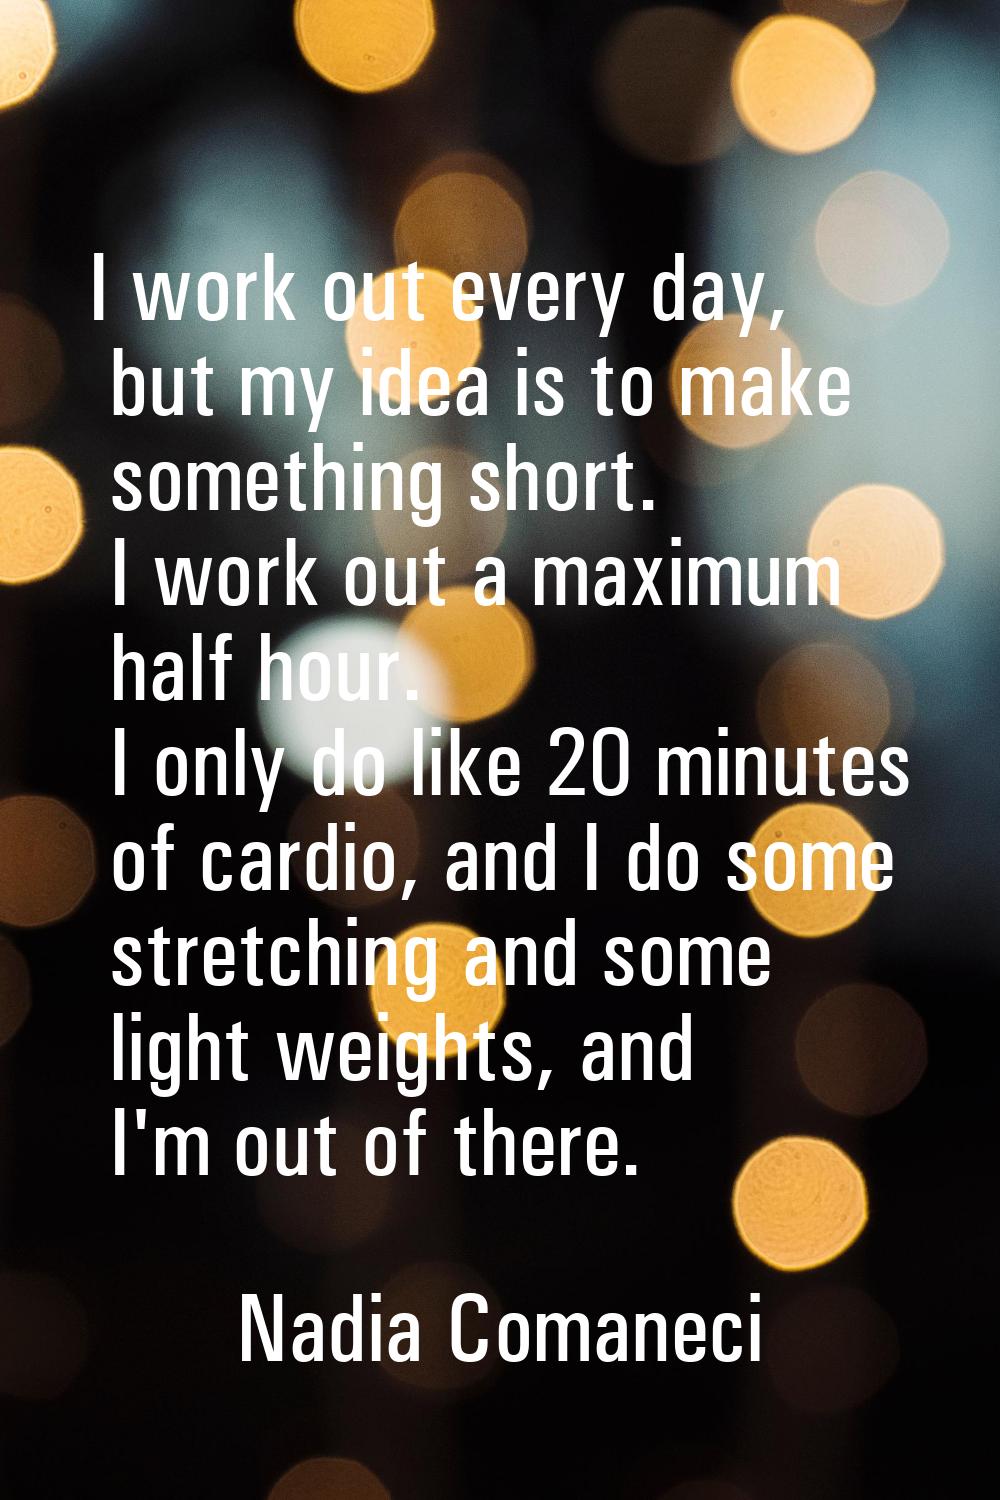 I work out every day, but my idea is to make something short. I work out a maximum half hour. I onl